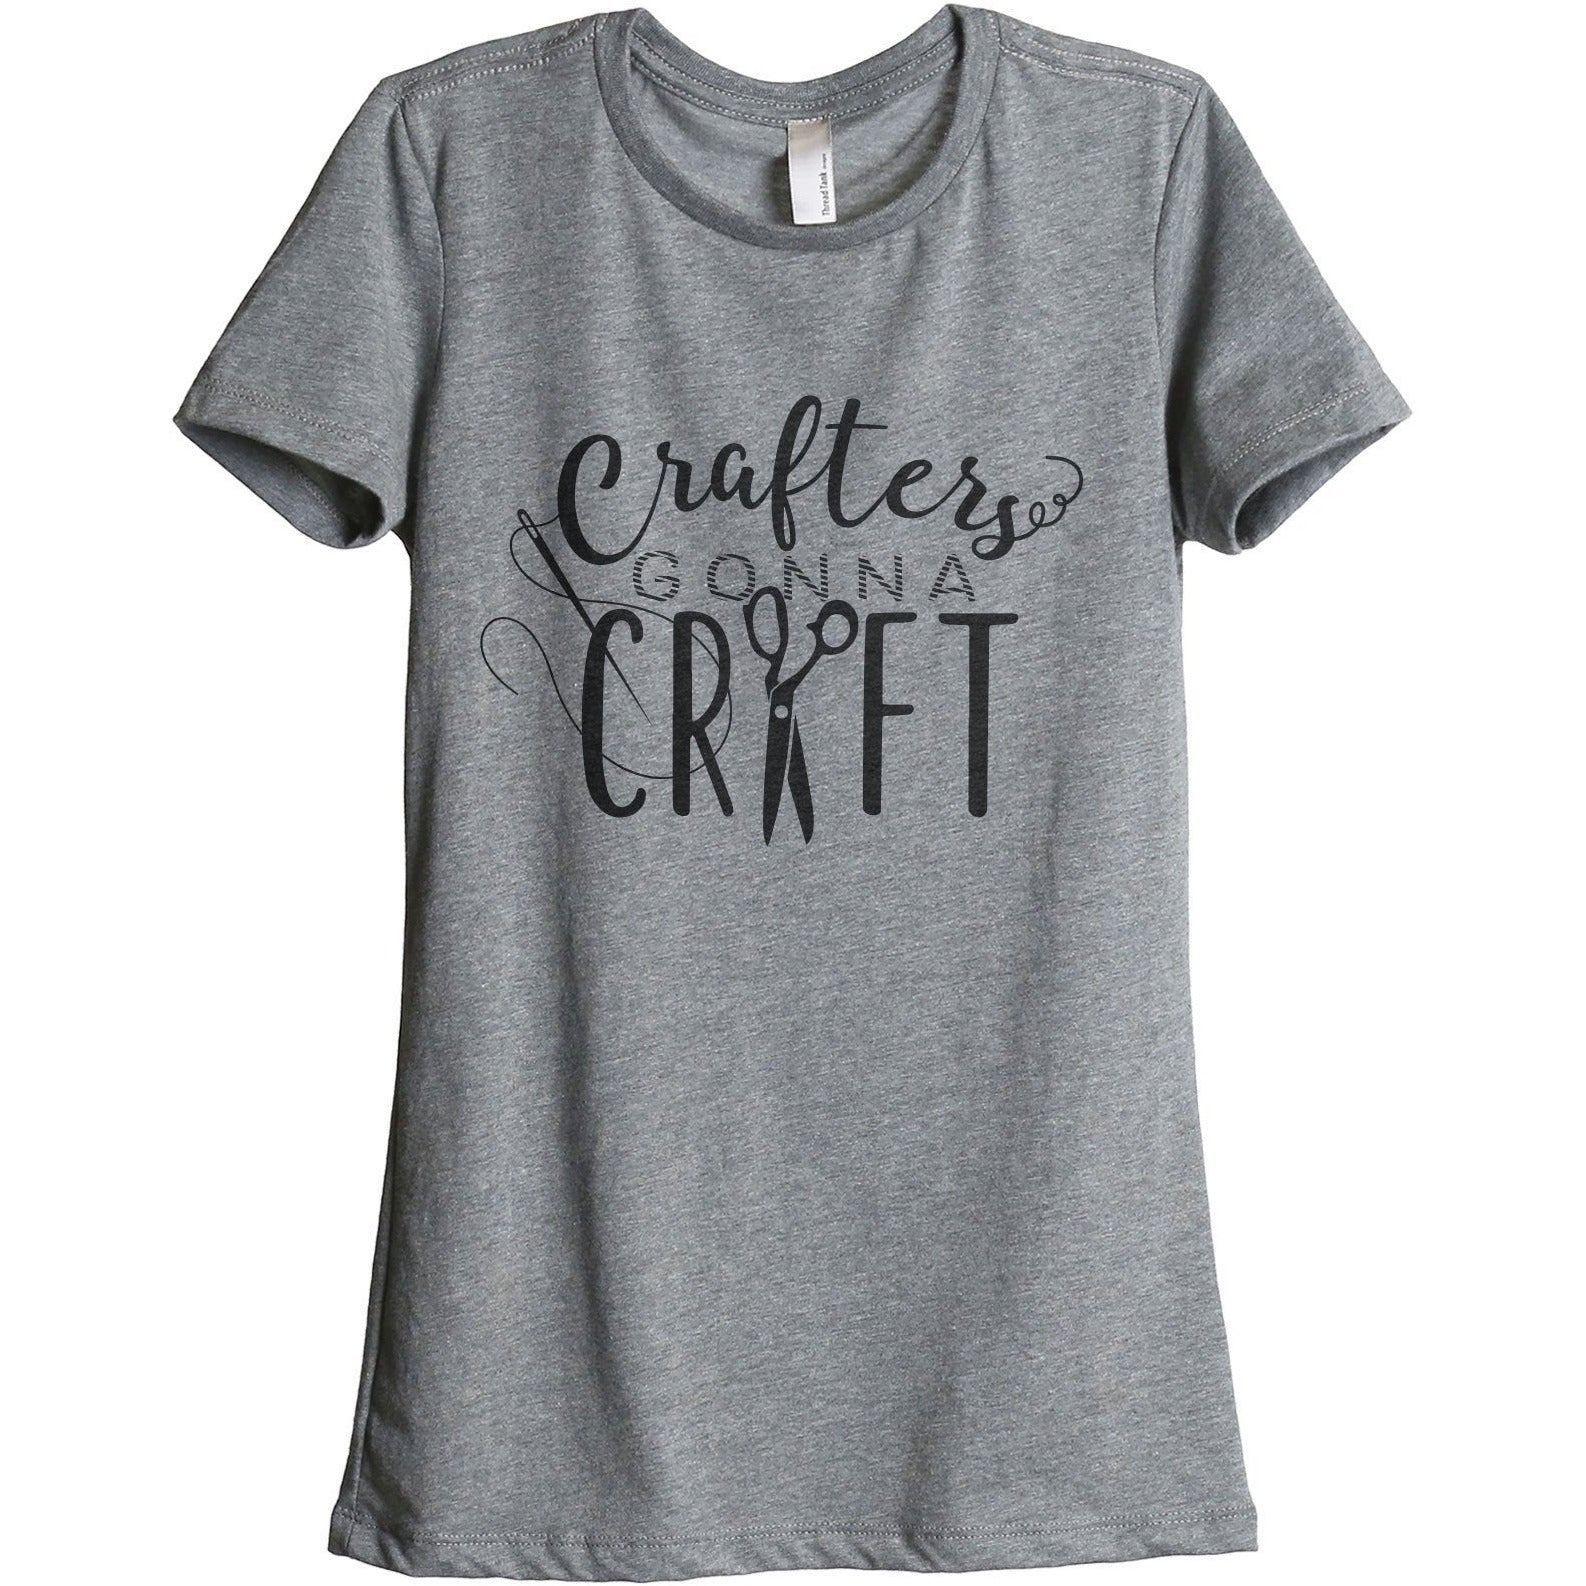 Crafters Gonna Craft Women's Relaxed Crewneck T-Shirt Top Tee Heather Grey